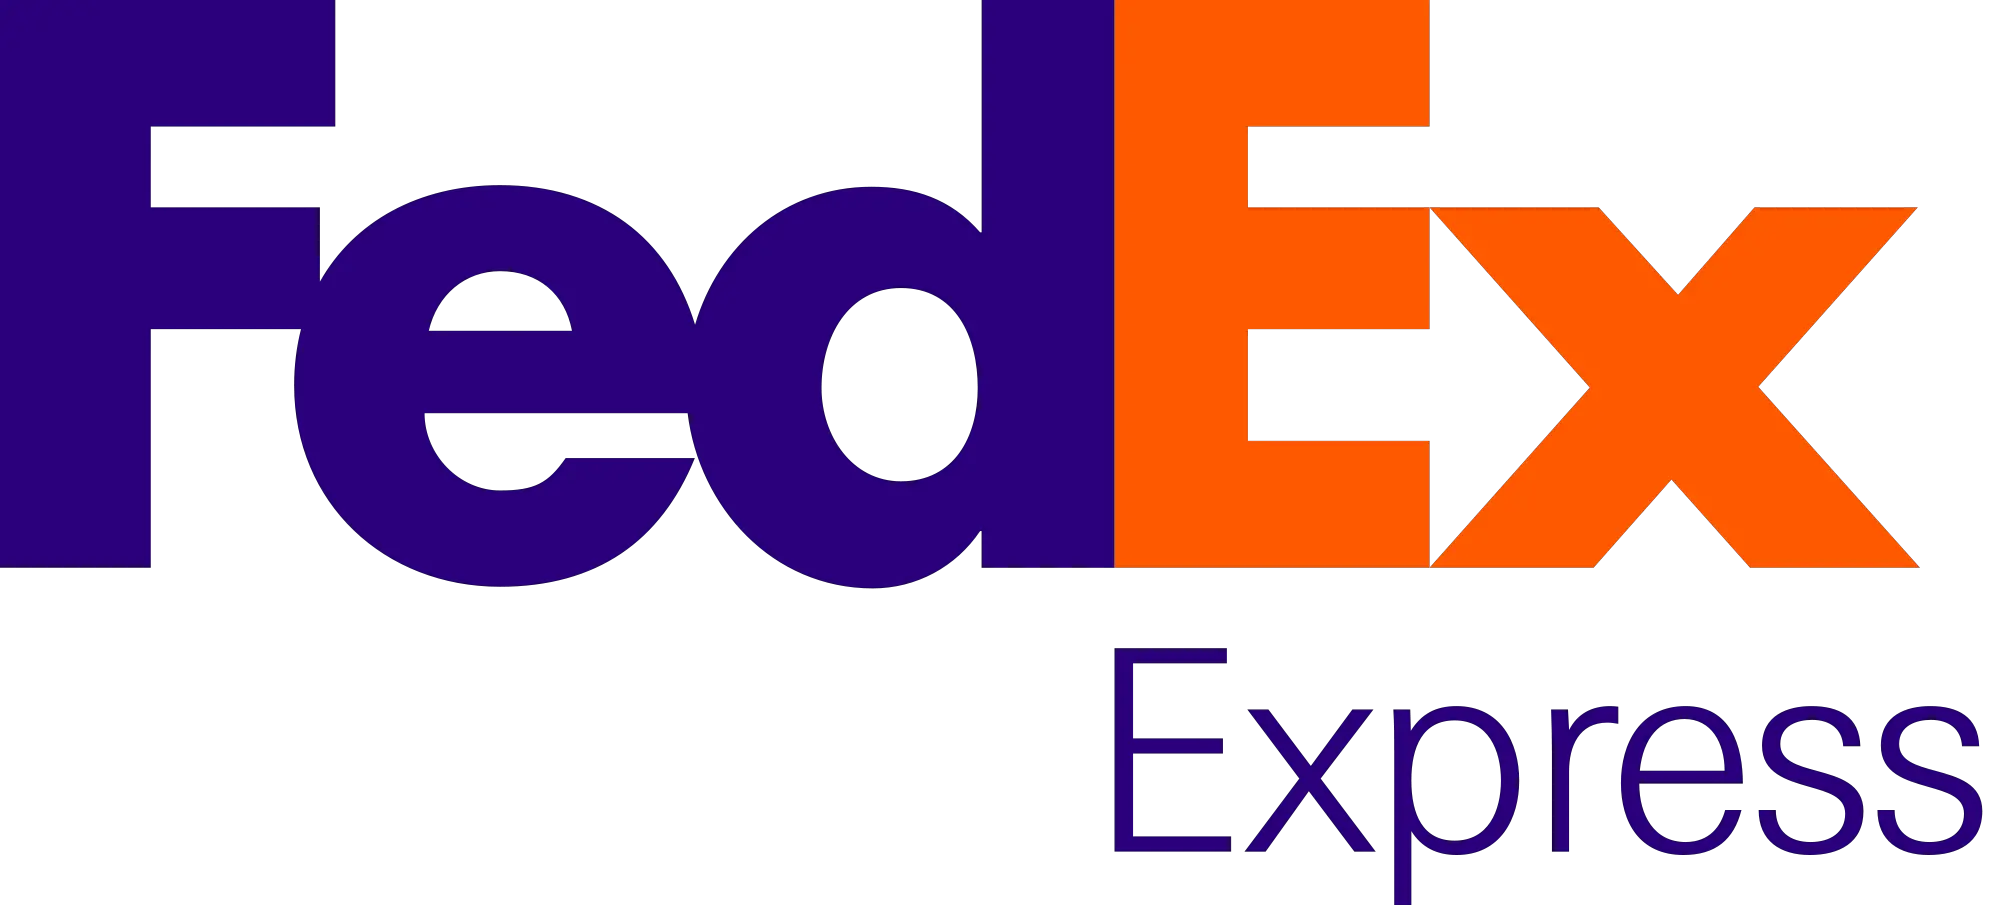 World Famous Logos With Hidden Meanings Photos The Fedex Express Logo Png Rapper Logos